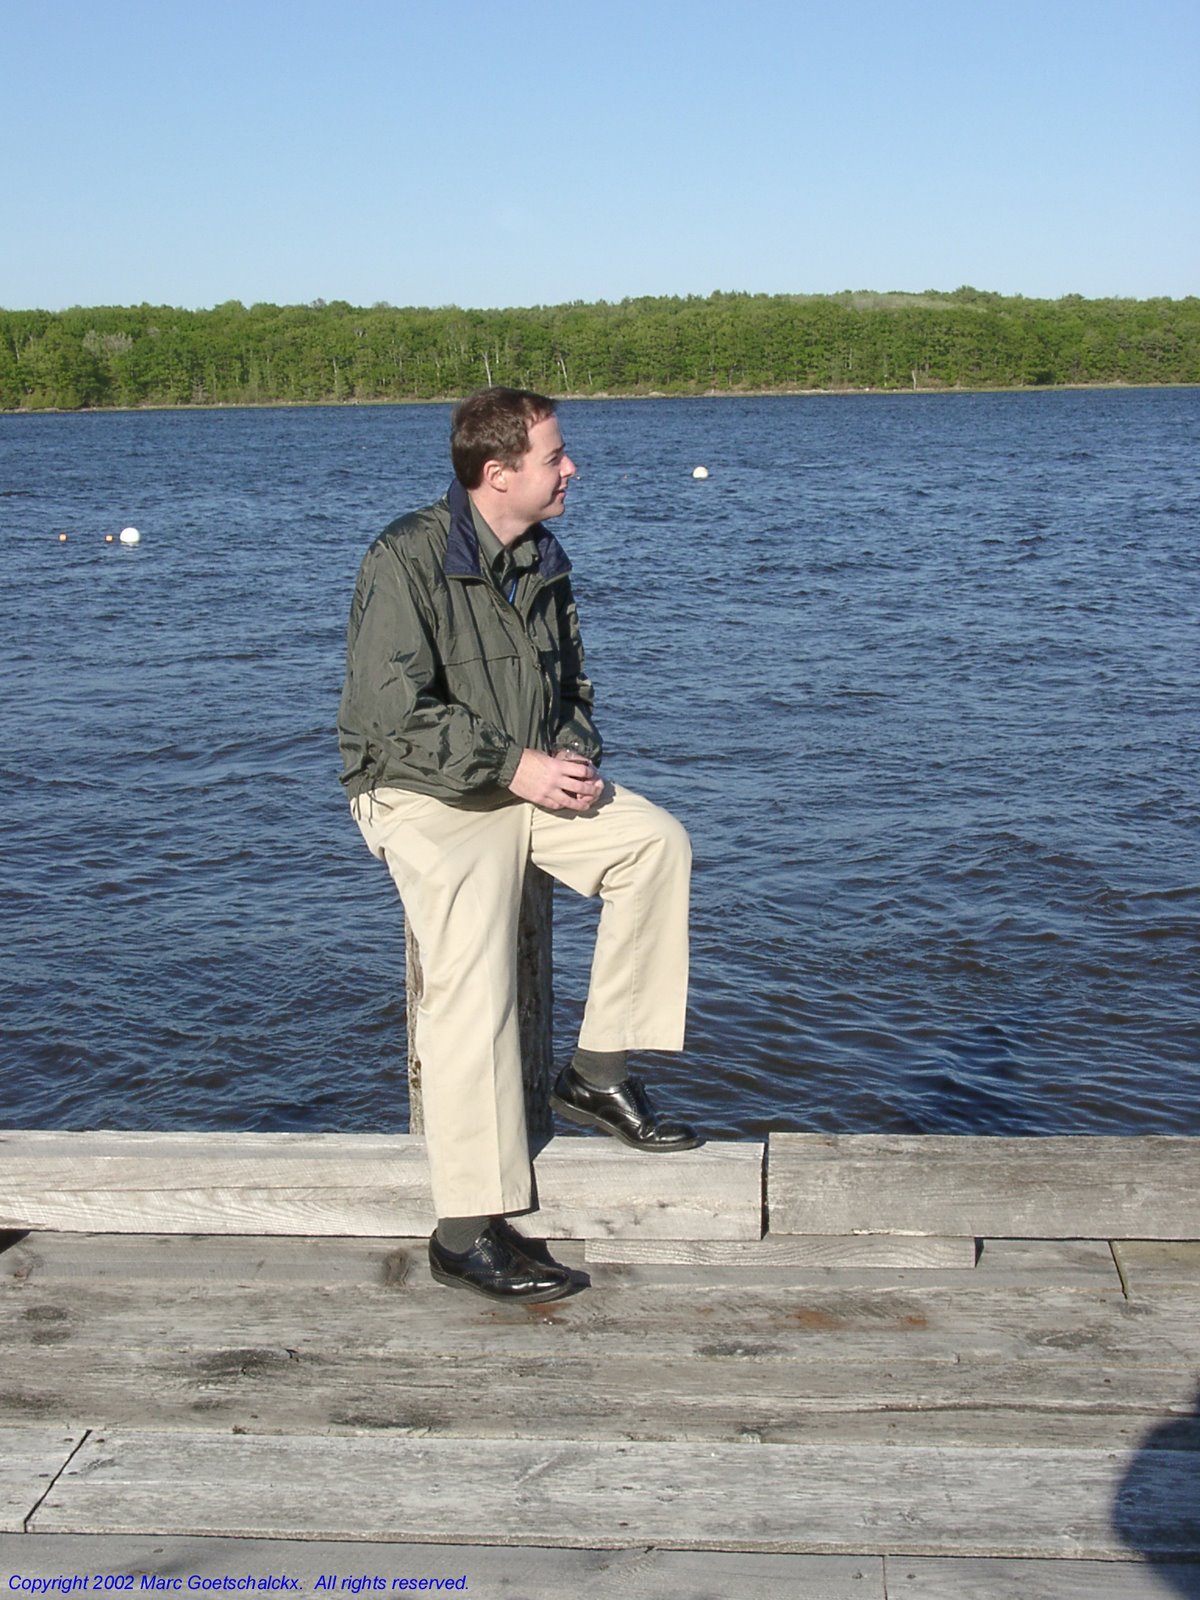 [Mike+Ogle+contemplating+on+the+dock+(c).jpg]